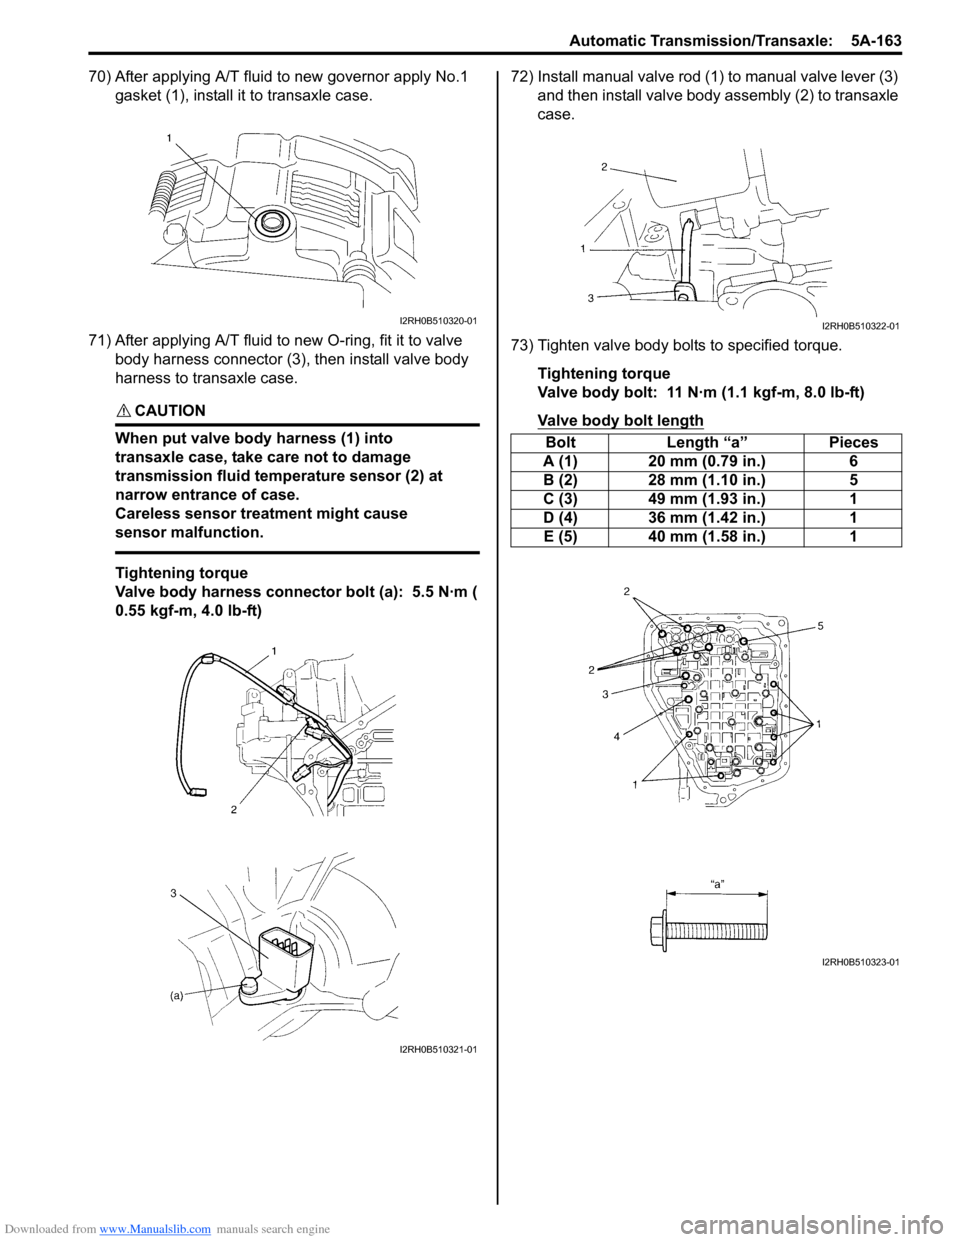 SUZUKI SWIFT 2006 2.G Service Workshop Manual Downloaded from www.Manualslib.com manuals search engine Automatic Transmission/Transaxle:  5A-163
70) After applying A/T fluid to new governor apply No.1 gasket (1), install it  to transaxle case.
71